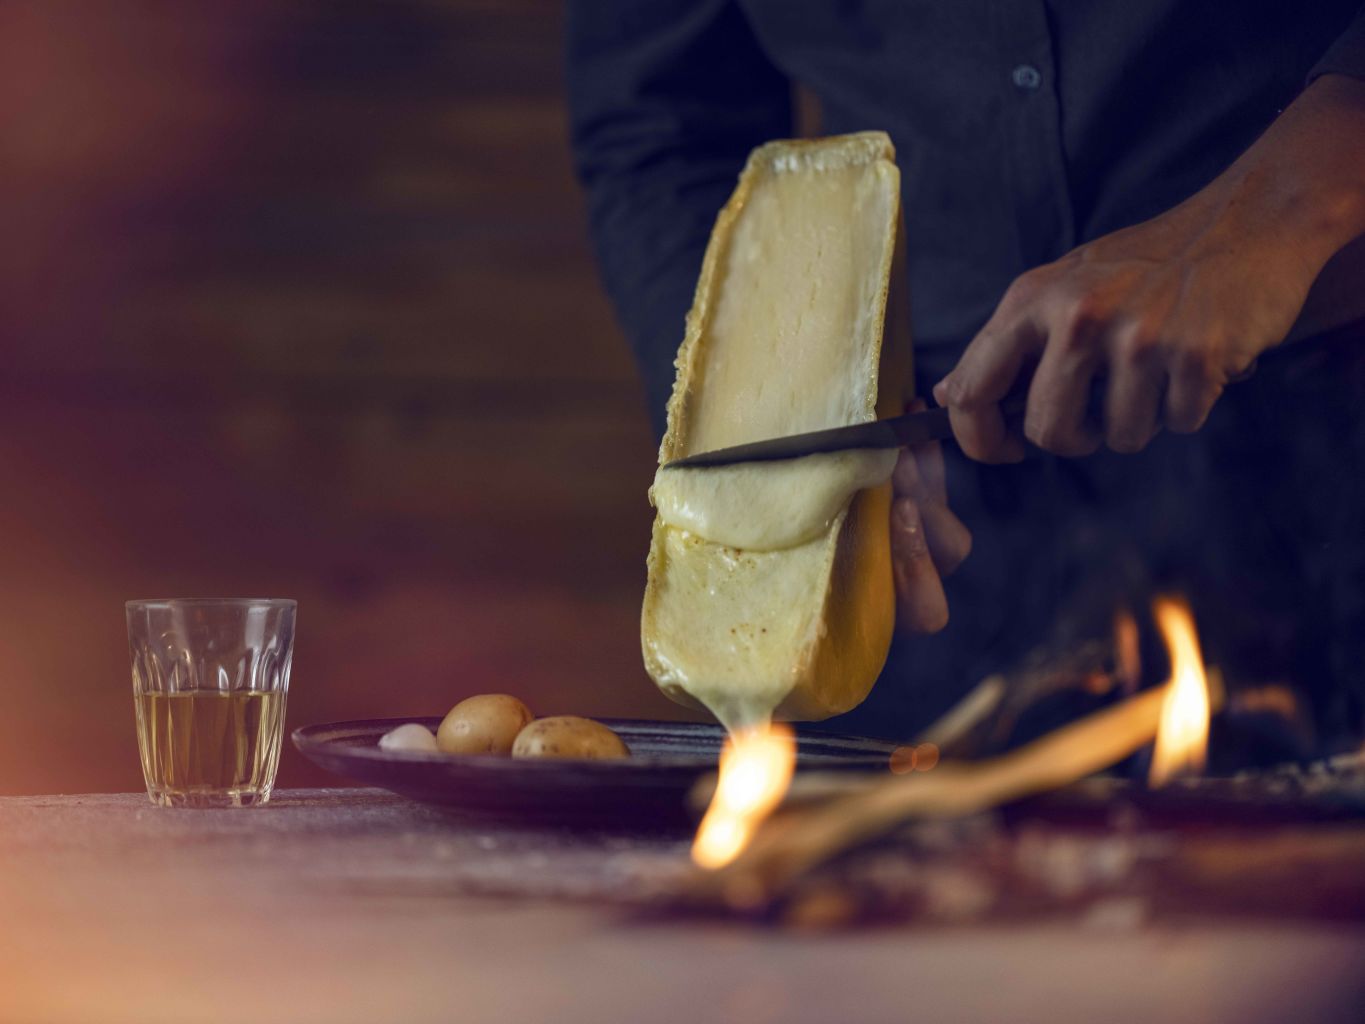 raclette from the valais - wood fire, cheese, Valais, Switzerland